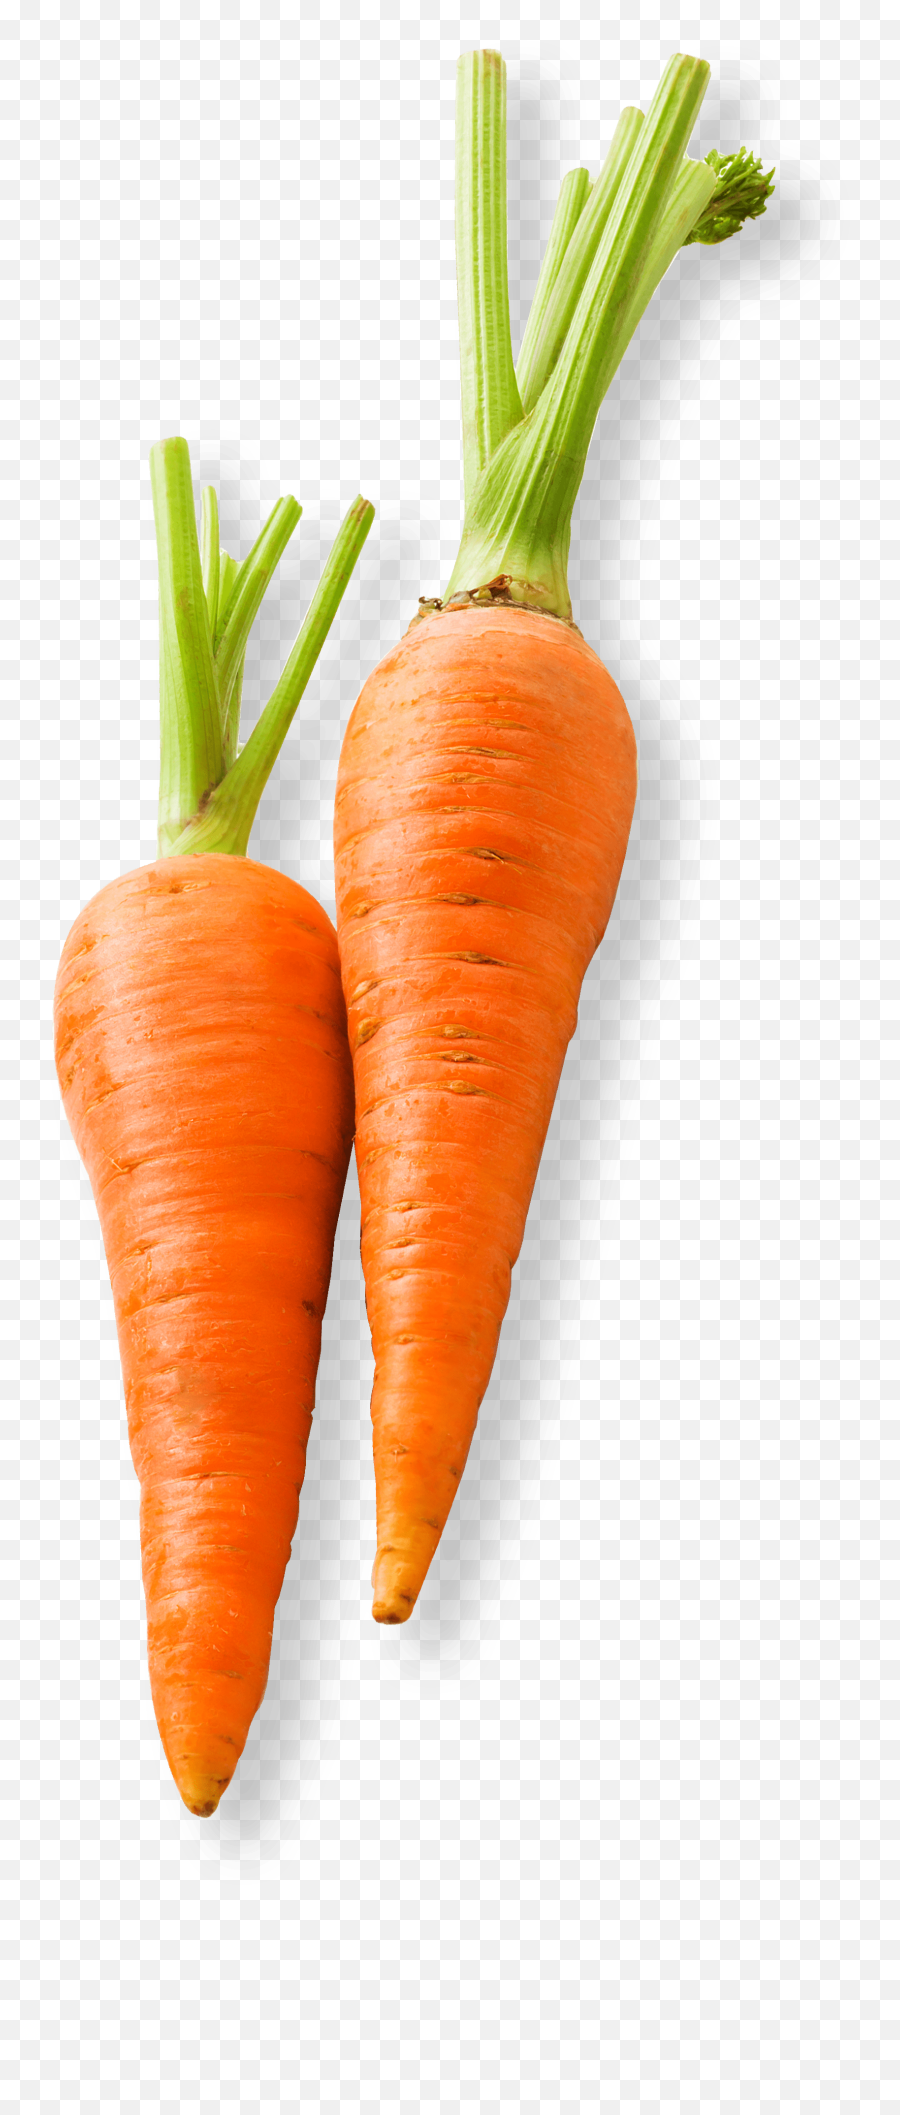 Baby Carrot Vegetable Food Carrot Cake - Baby Carrot Emoji,Carrot Transparent Background